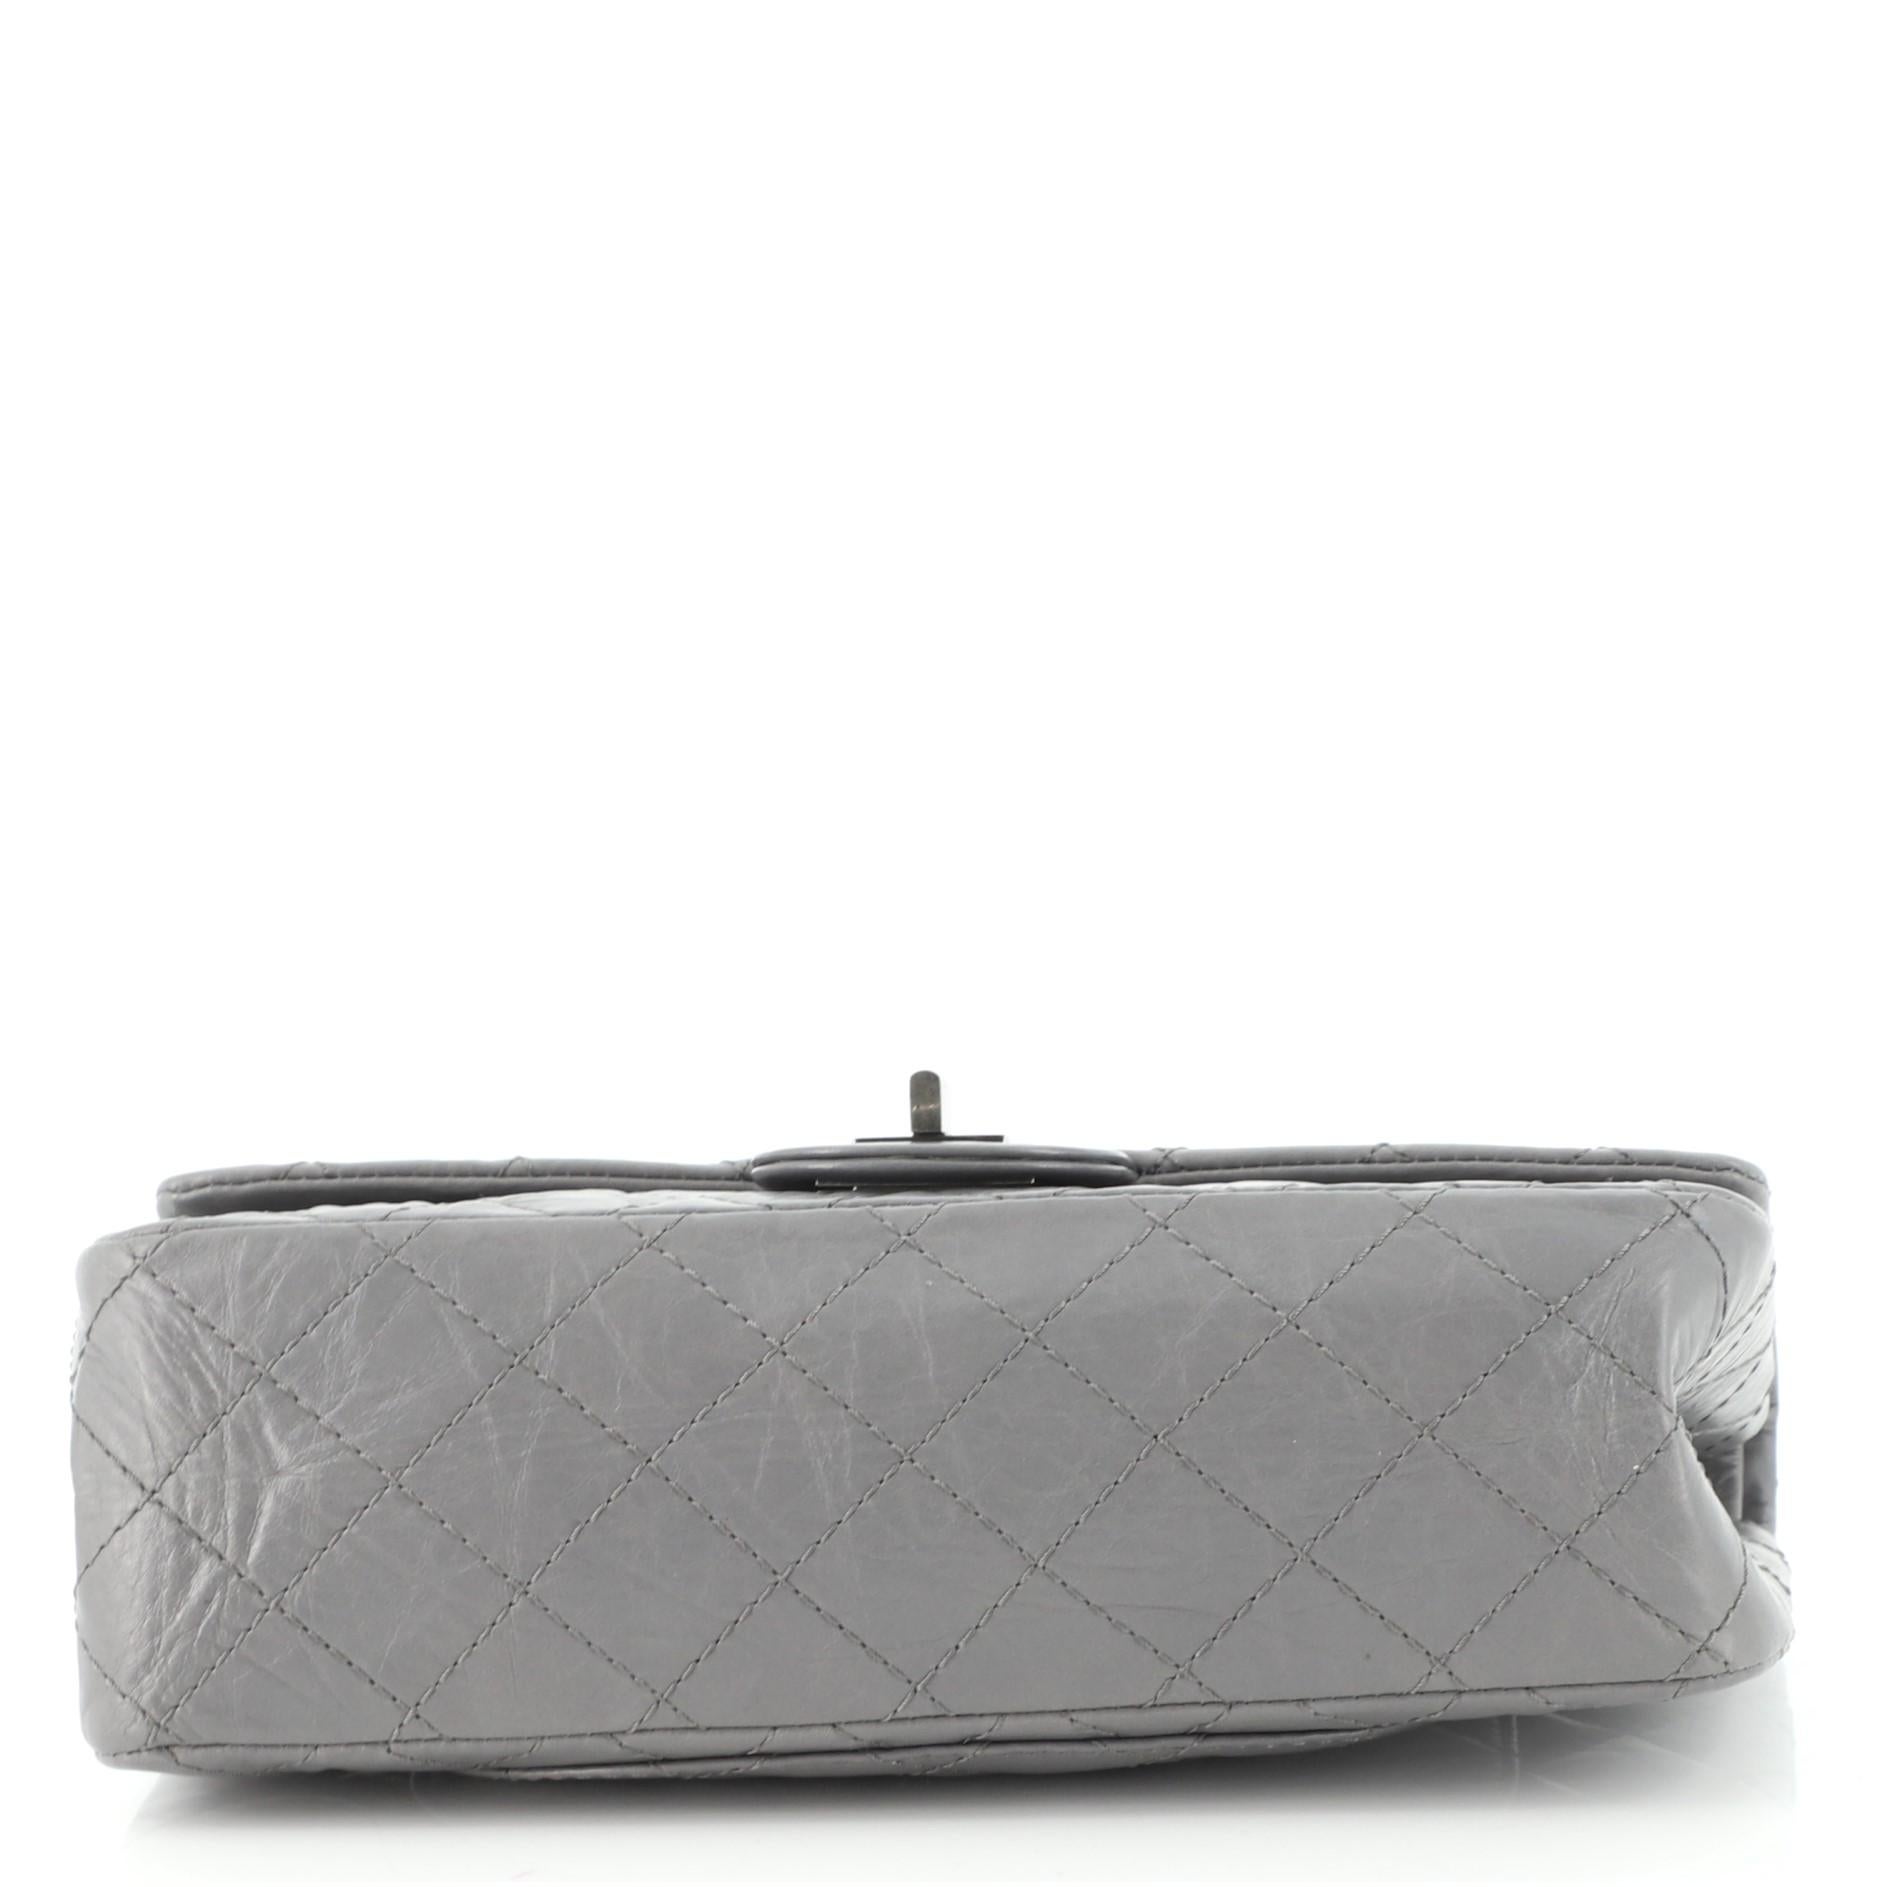 Gray Chanel Reissue 2.55 Flap Bag Quilted Aged Calfskin 225